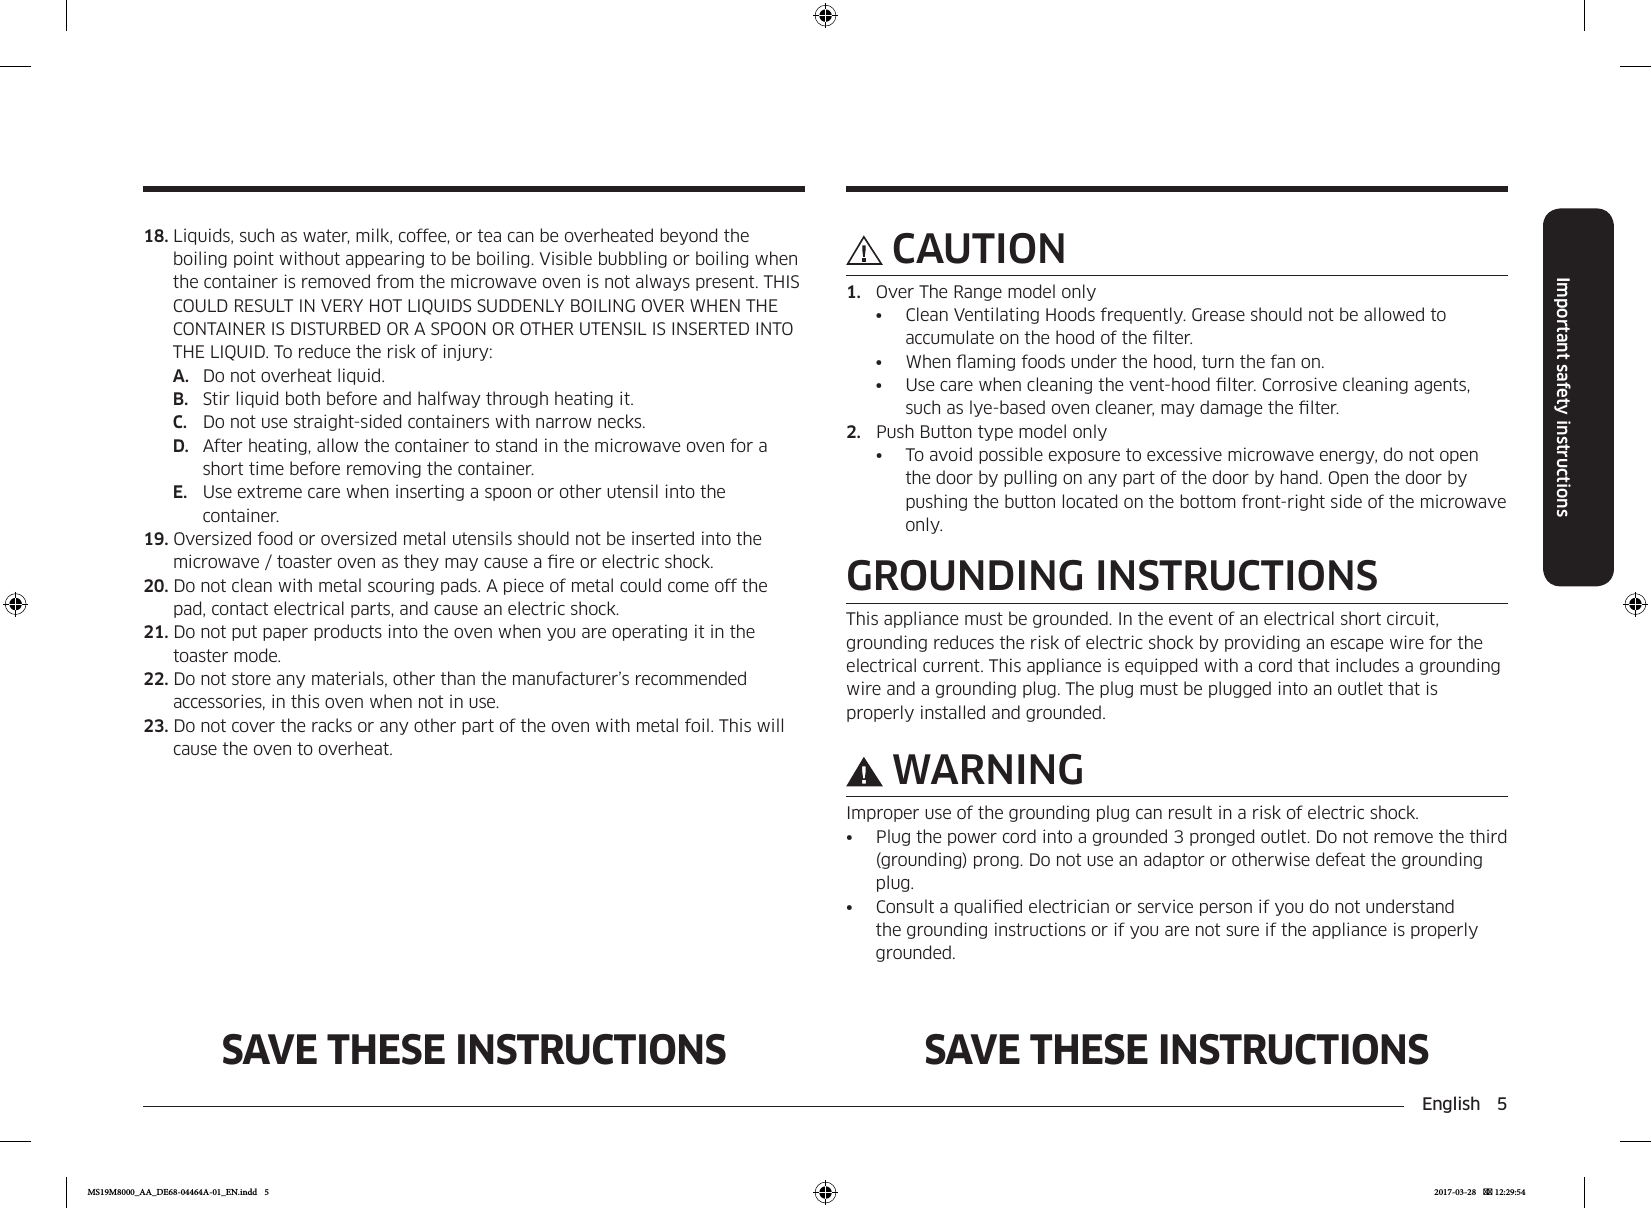 English  5Important safety instructionsSAVE THESE INSTRUCTIONS SAVE THESE INSTRUCTIONSCAUTION1.  Over The Range model only•  Clean Ventilating Hoods frequently. Grease should not be allowed to accumulate on the hood of the lter.•  When aming foods under the hood, turn the fan on.•  Use care when cleaning the vent-hood lter. Corrosive cleaning agents, such as lye-based oven cleaner, may damage the lter.2.  Push Button type model only•  To avoid possible exposure to excessive microwave energy, do not open the door by pulling on any part of the door by hand. Open the door by pushing the button located on the bottom front-right side of the microwave only.GROUNDING INSTRUCTIONSThis appliance must be grounded. In the event of an electrical short circuit, grounding reduces the risk of electric shock by providing an escape wire for the electrical current. This appliance is equipped with a cord that includes a grounding wire and a grounding plug. The plug must be plugged into an outlet that is properly installed and grounded.WARNINGImproper use of the grounding plug can result in a risk of electric shock.•  Plug the power cord into a grounded 3 pronged outlet. Do not remove the third (grounding) prong. Do not use an adaptor or otherwise defeat the grounding plug.•  Consult a qualied electrician or service person if you do not understand the grounding instructions or if you are not sure if the appliance is properly grounded.18. Liquids, such as water, milk, coffee, or tea can be overheated beyond the boiling point without appearing to be boiling. Visible bubbling or boiling when the container is removed from the microwave oven is not always present. THIS COULD RESULT IN VERY HOT LIQUIDS SUDDENLY BOILING OVER WHEN THE CONTAINER IS DISTURBED OR A SPOON OR OTHER UTENSIL IS INSERTED INTO THE LIQUID. To reduce the risk of injury:A.  Do not overheat liquid.B.  Stir liquid both before and halfway through heating it.C.  Do not use straight-sided containers with narrow necks.D.  After heating, allow the container to stand in the microwave oven for a short time before removing the container.E.  Use extreme care when inserting a spoon or other utensil into the container.19. Oversized food or oversized metal utensils should not be inserted into the microwave / toaster oven as they may cause a re or electric shock.20. Do not clean with metal scouring pads. A piece of metal could come off the pad, contact electrical parts, and cause an electric shock. 21. Do not put paper products into the oven when you are operating it in the toaster mode.22. Do not store any materials, other than the manufacturer’s recommended accessories, in this oven when not in use.23. Do not cover the racks or any other part of the oven with metal foil. This will cause the oven to overheat.MS19M8000_AA_DE68-04464A-01_EN.indd   5 2017-03-28    12:29:54